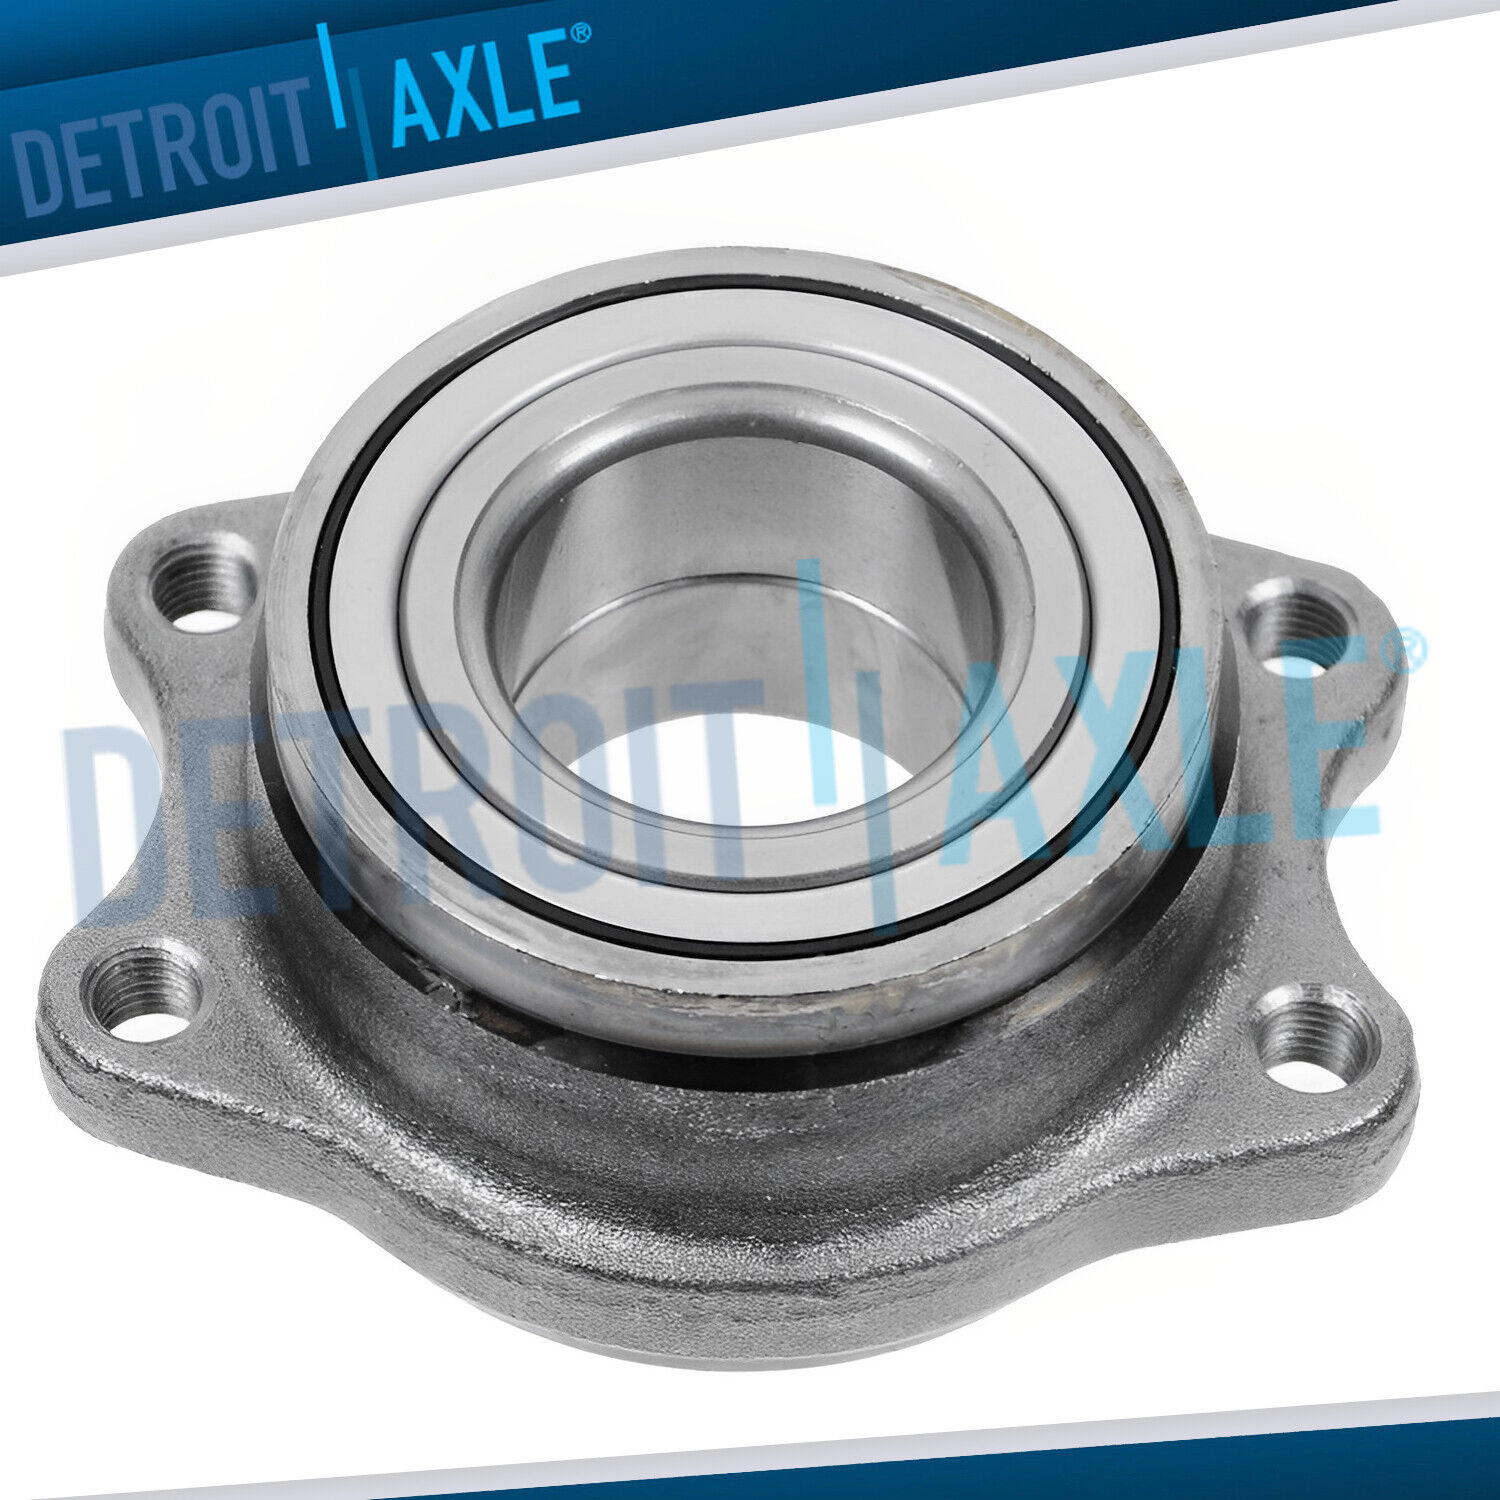 AWD Rear Left or Right Side Wheel Bearing Assembly for Mitsubishi Eclipse Lancer